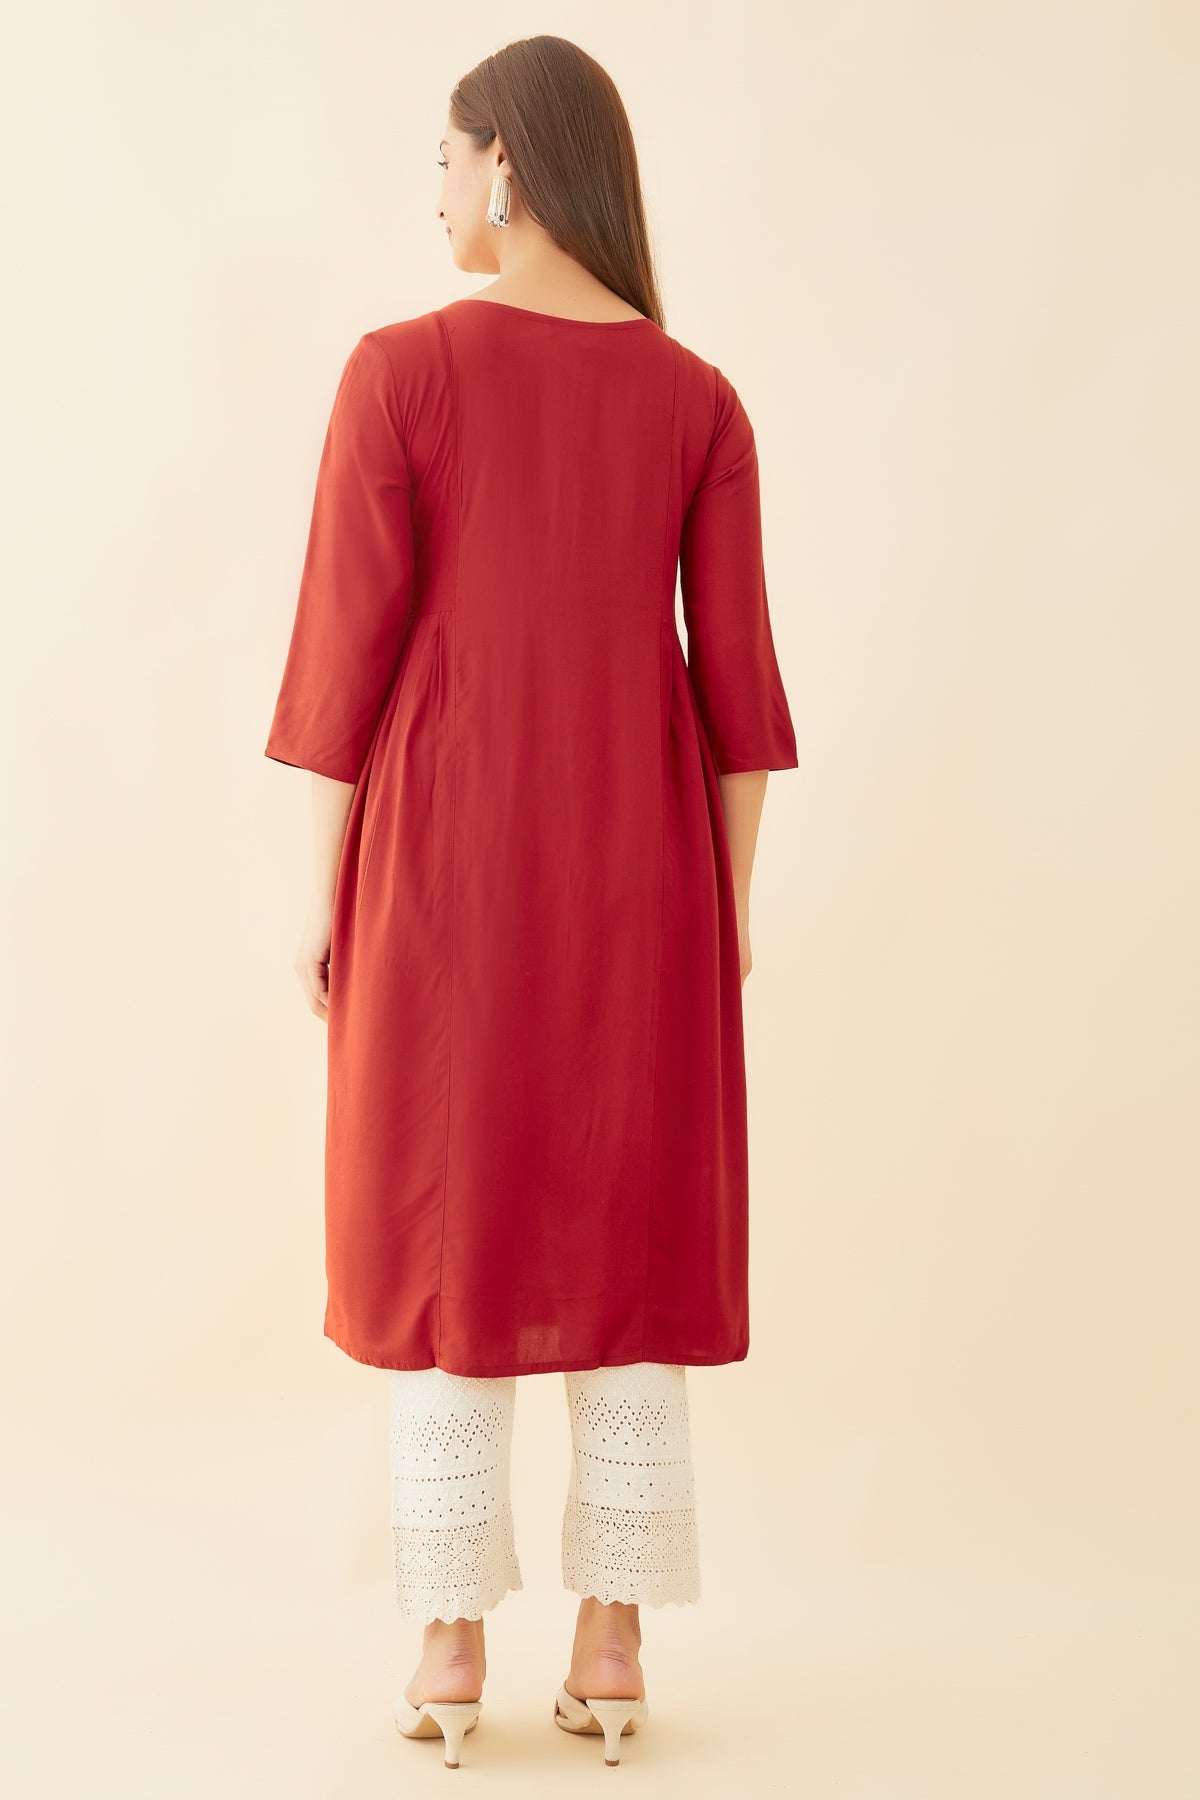 All Over Leave Motif Embroidered A Line Kurta Rust